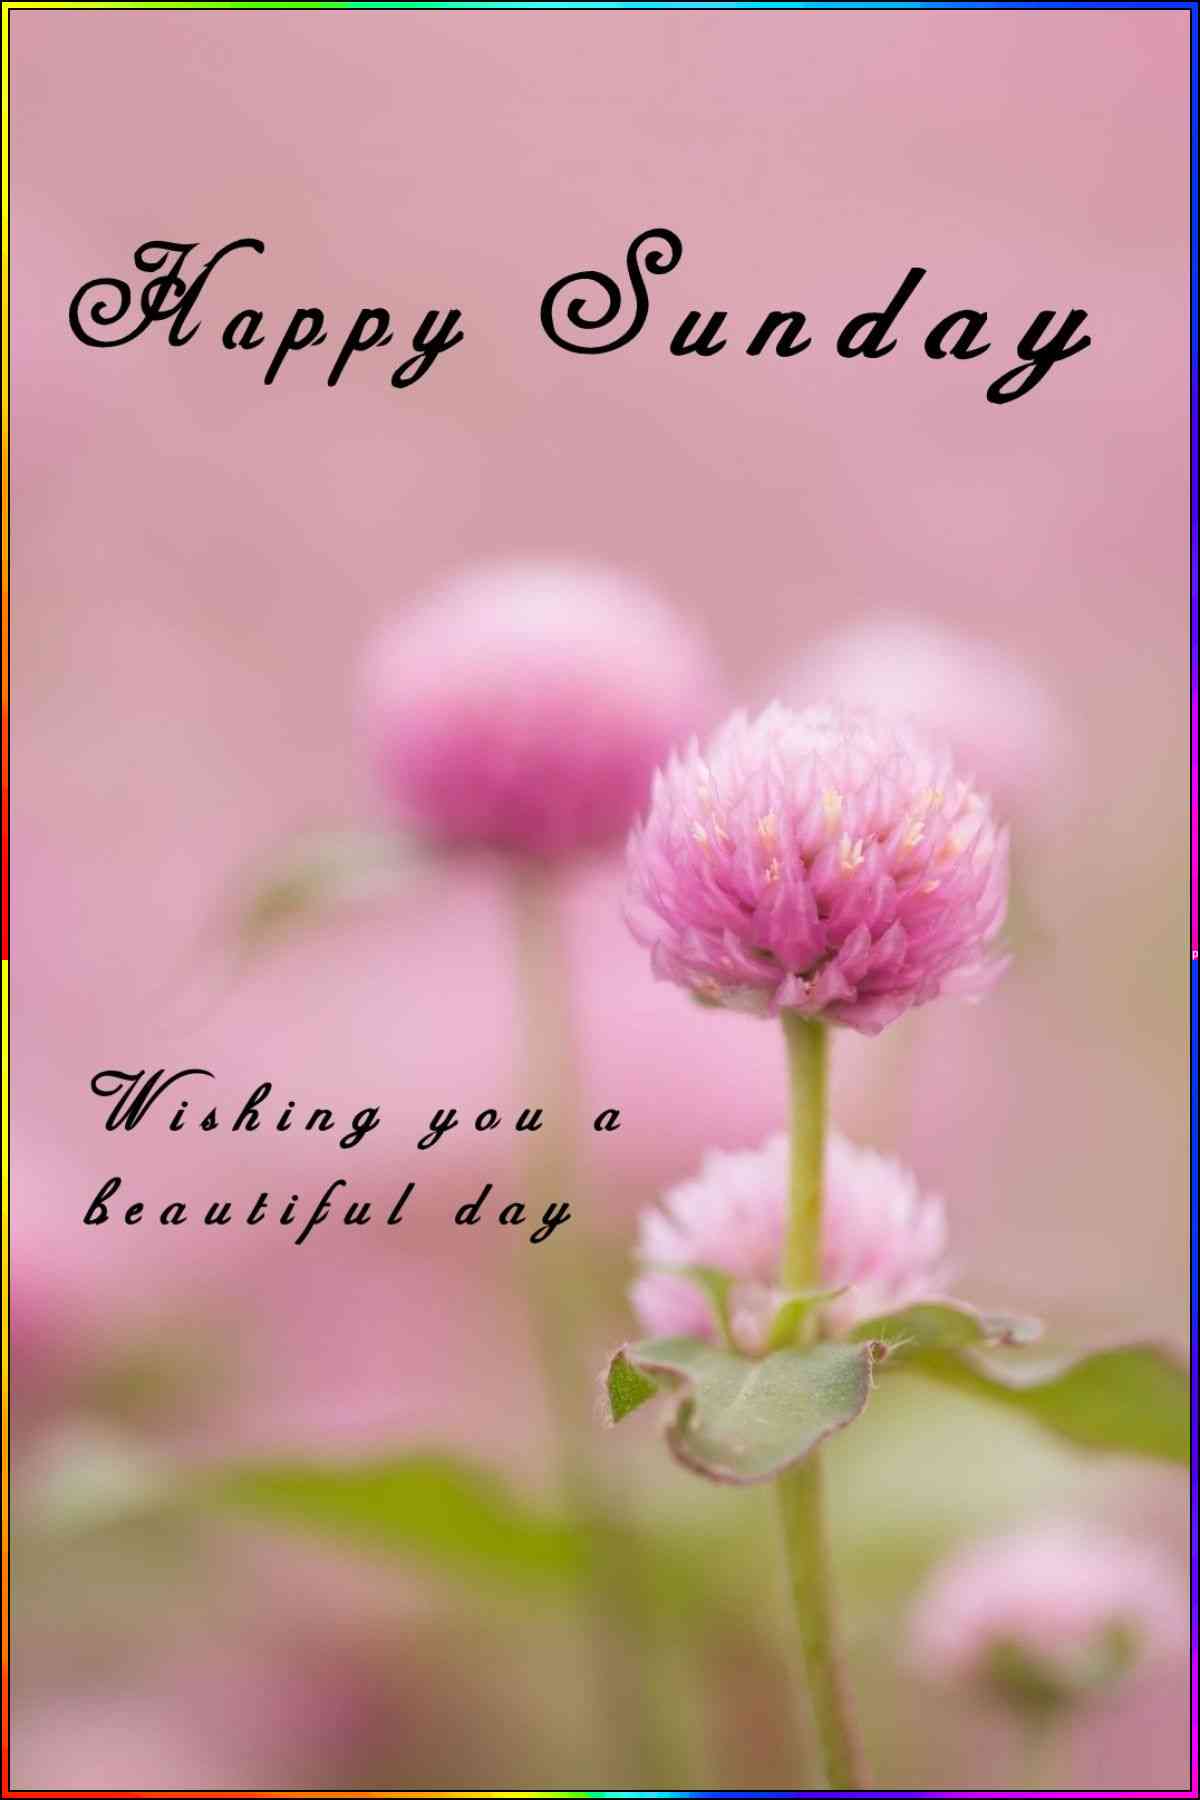 pictures of happy sunday
